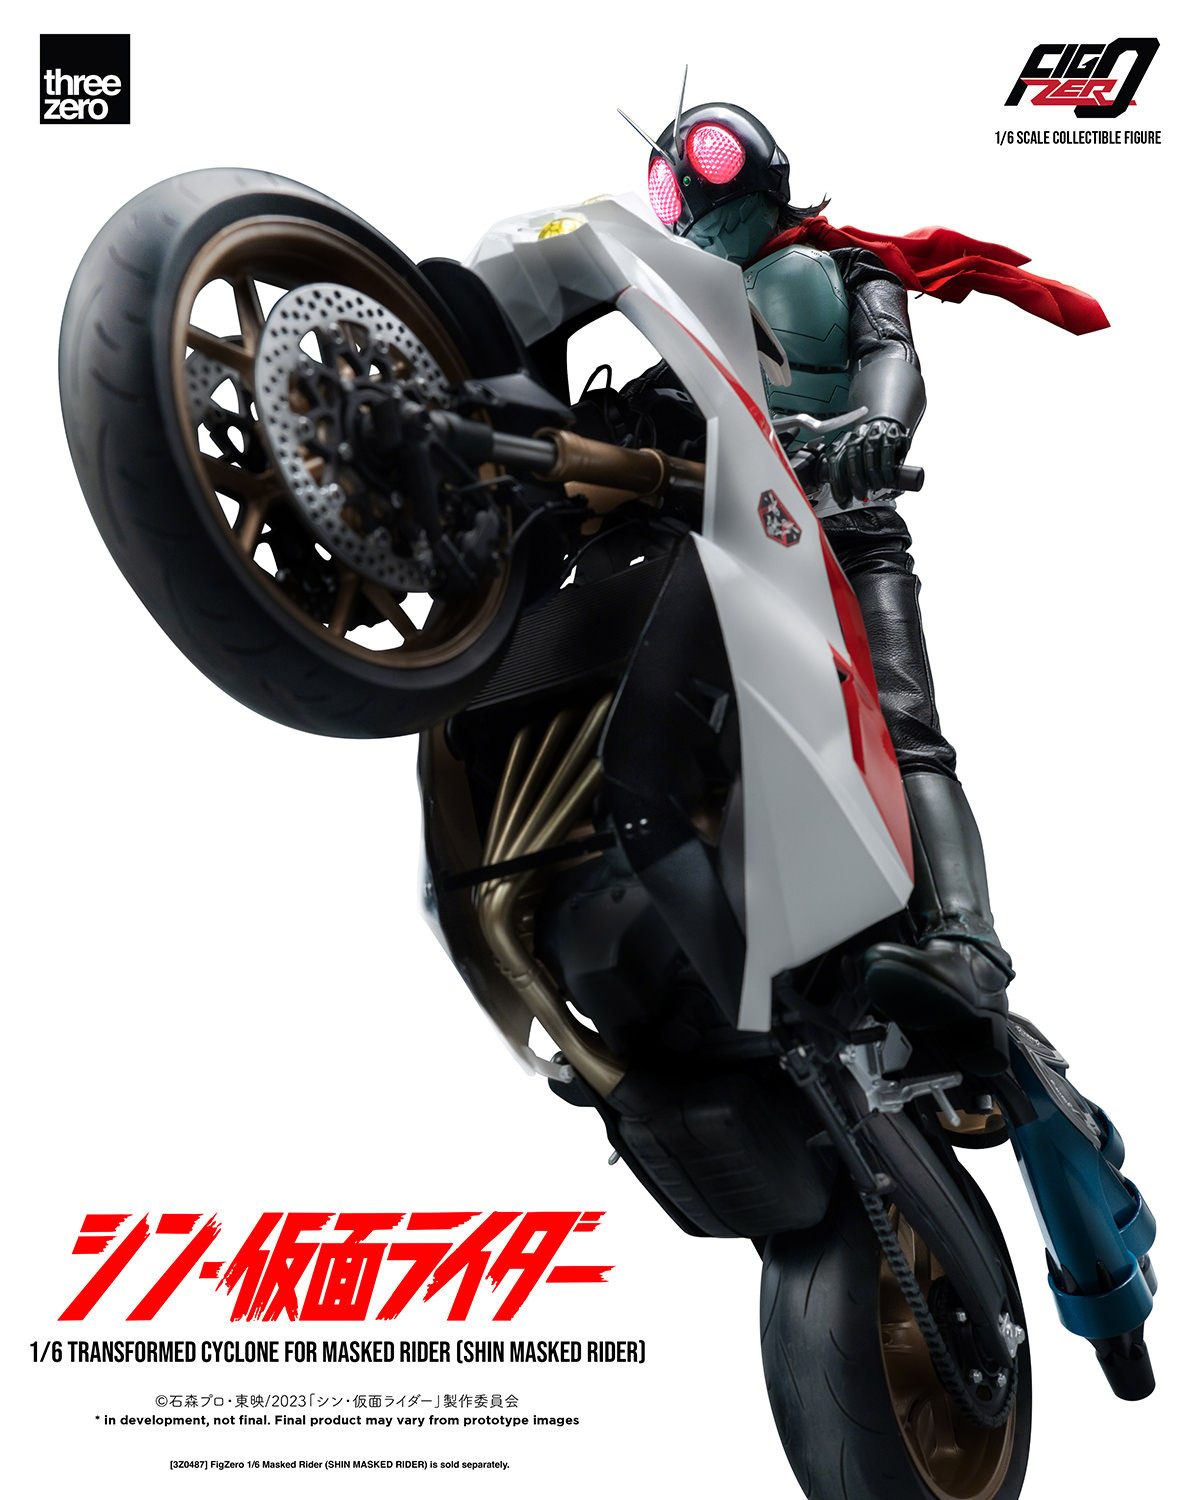 Transformed Cyclone for Masked Rider (Shin Masked Rider) (Prototype Shown) View 22